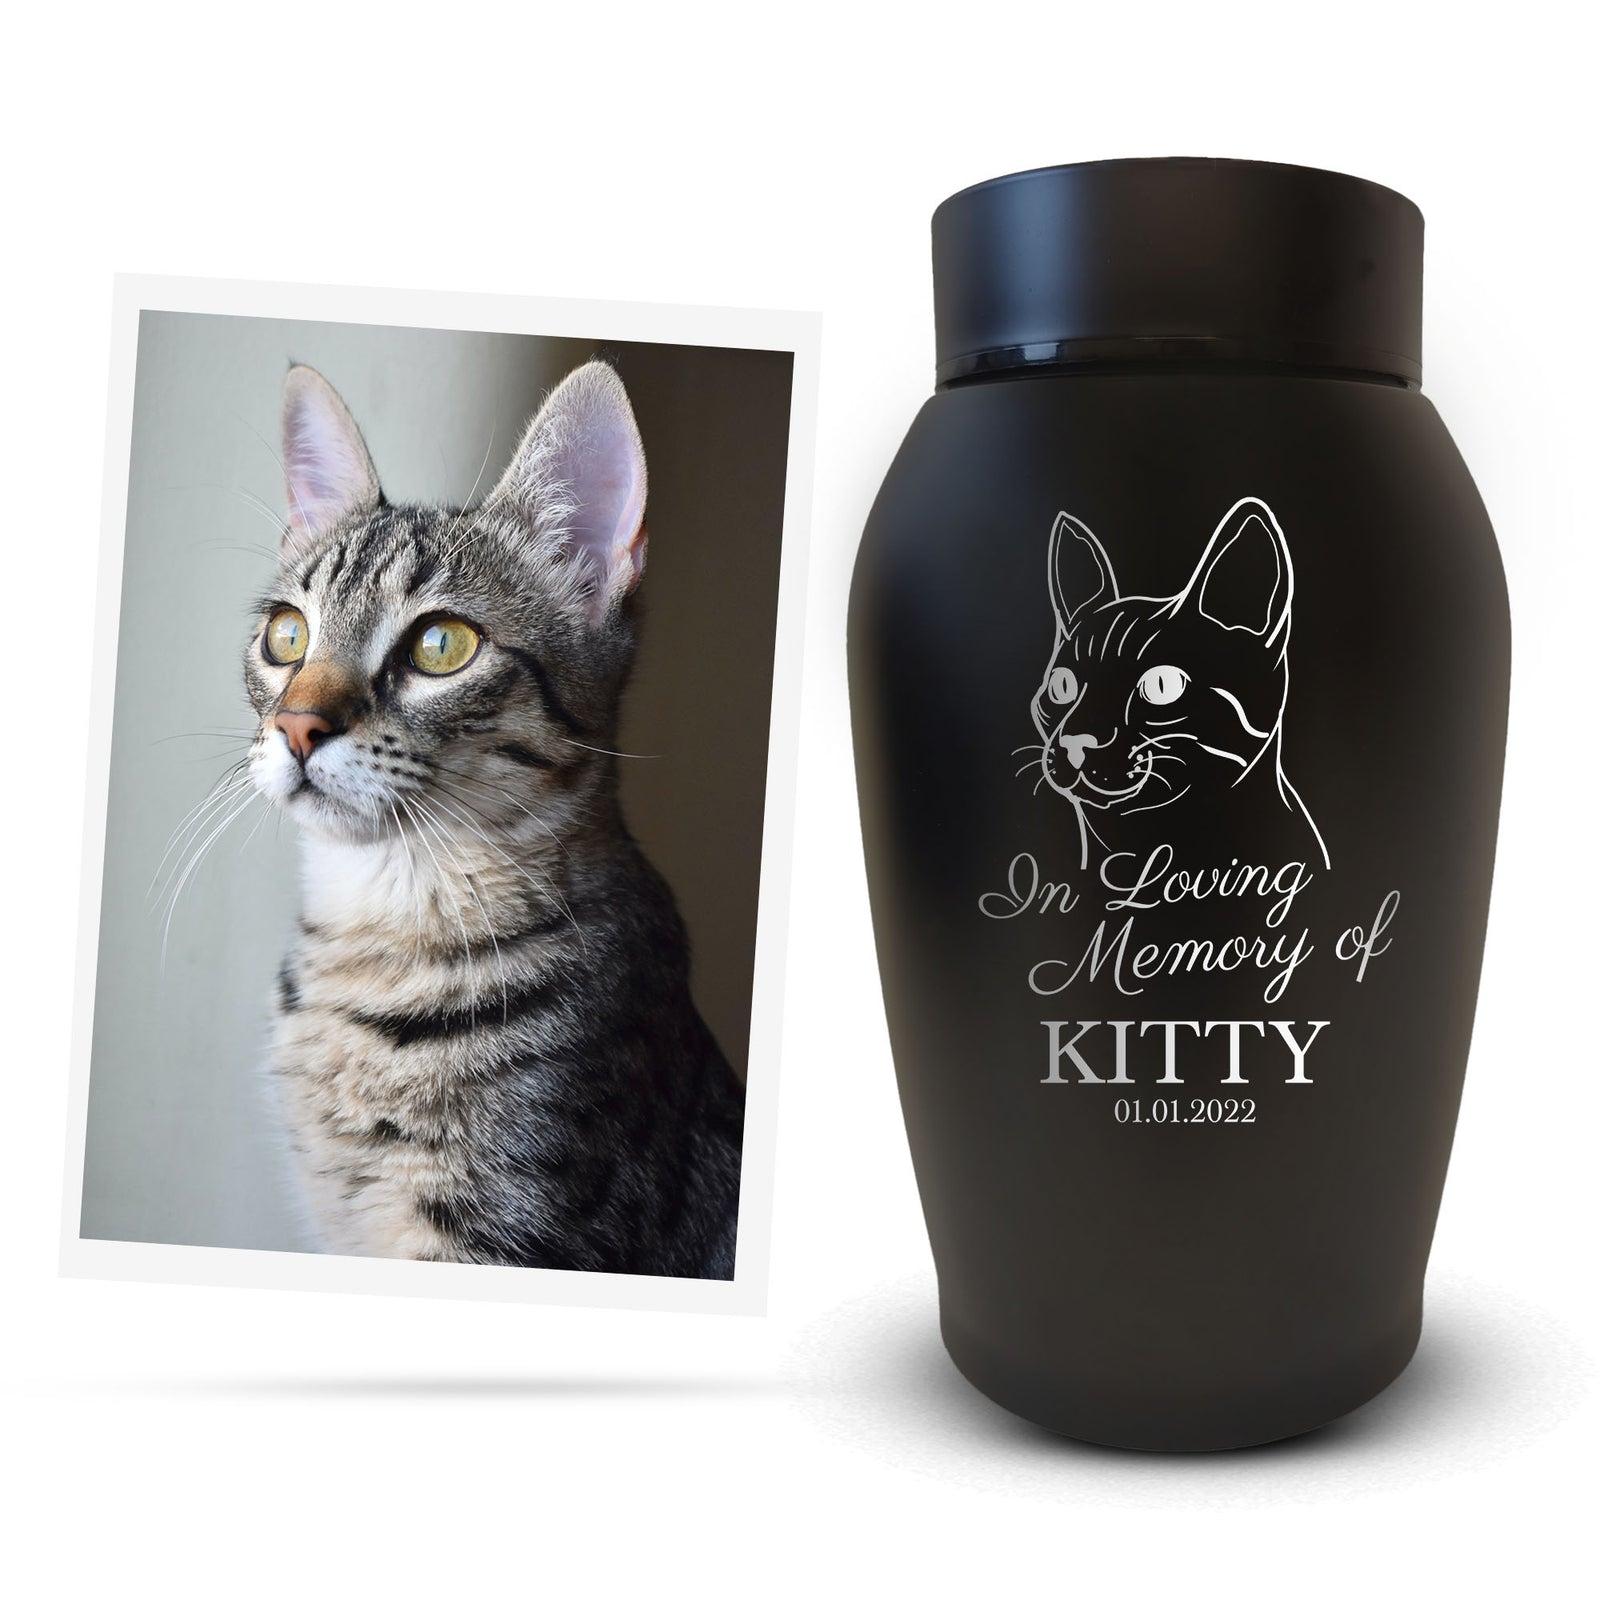 Custom Engraved Pet Urn: Personalized with Your Pet Photo/Image, Name, and Date - Stainless Steel Cremation Urns for Pets Ashes with Airtight Closure, Up to 50 Lbs Capacity | Black,Red.Teal, 7" x 5"